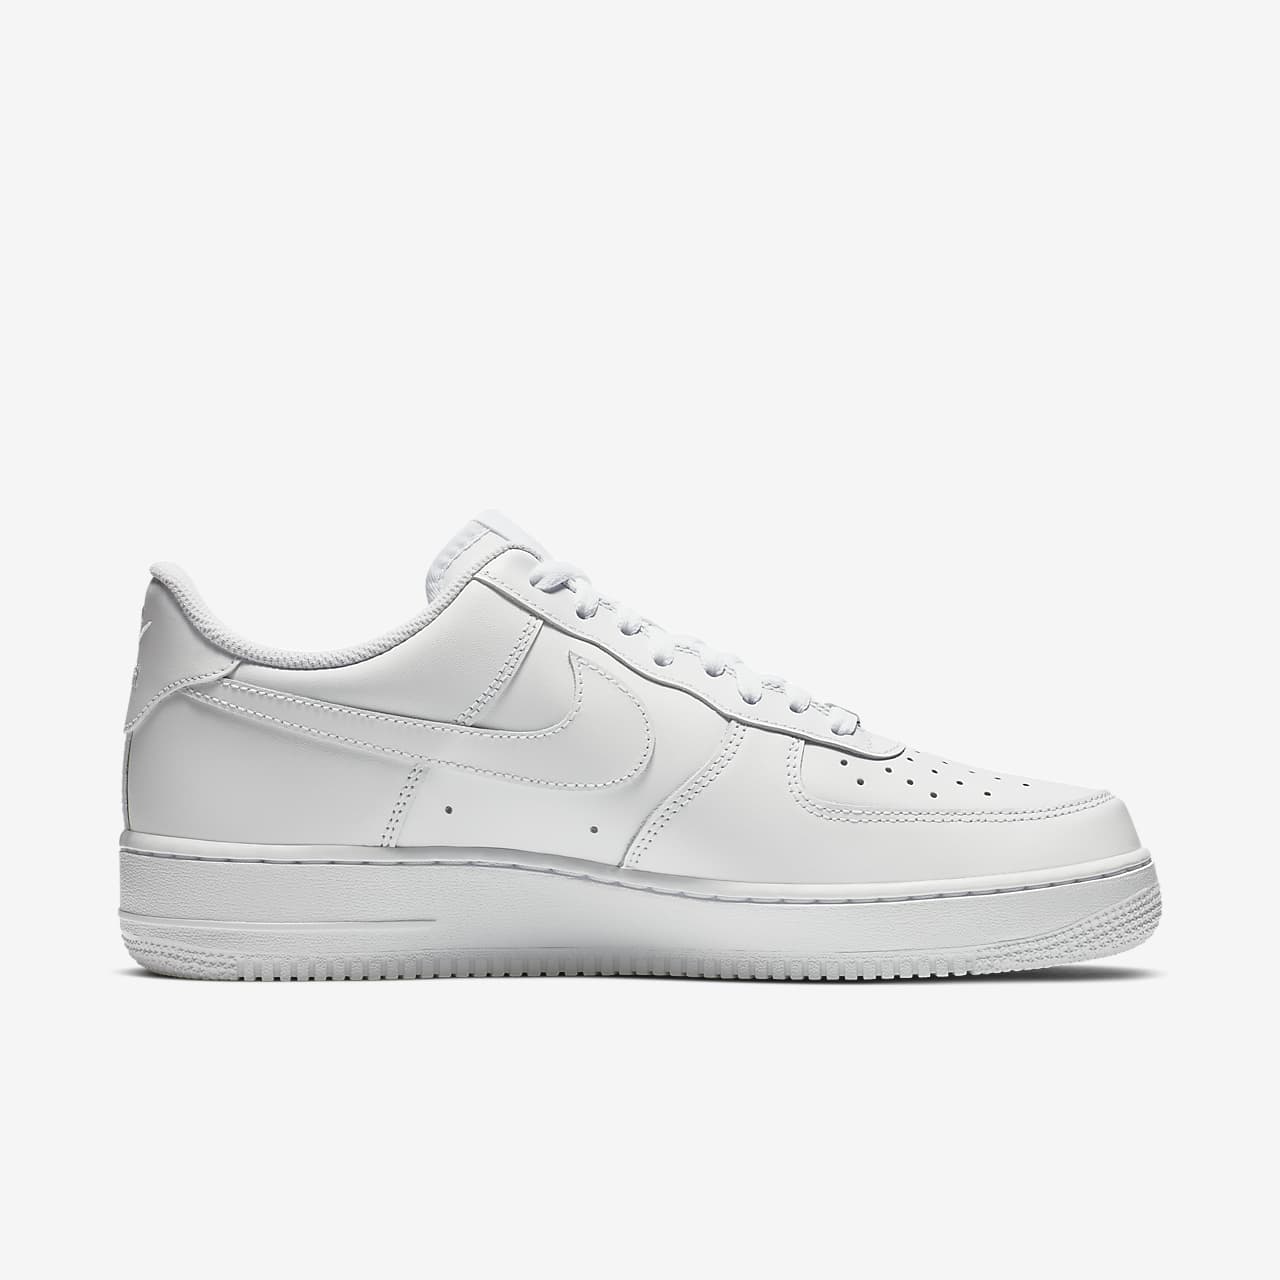 nike air force 1 low size 9.5